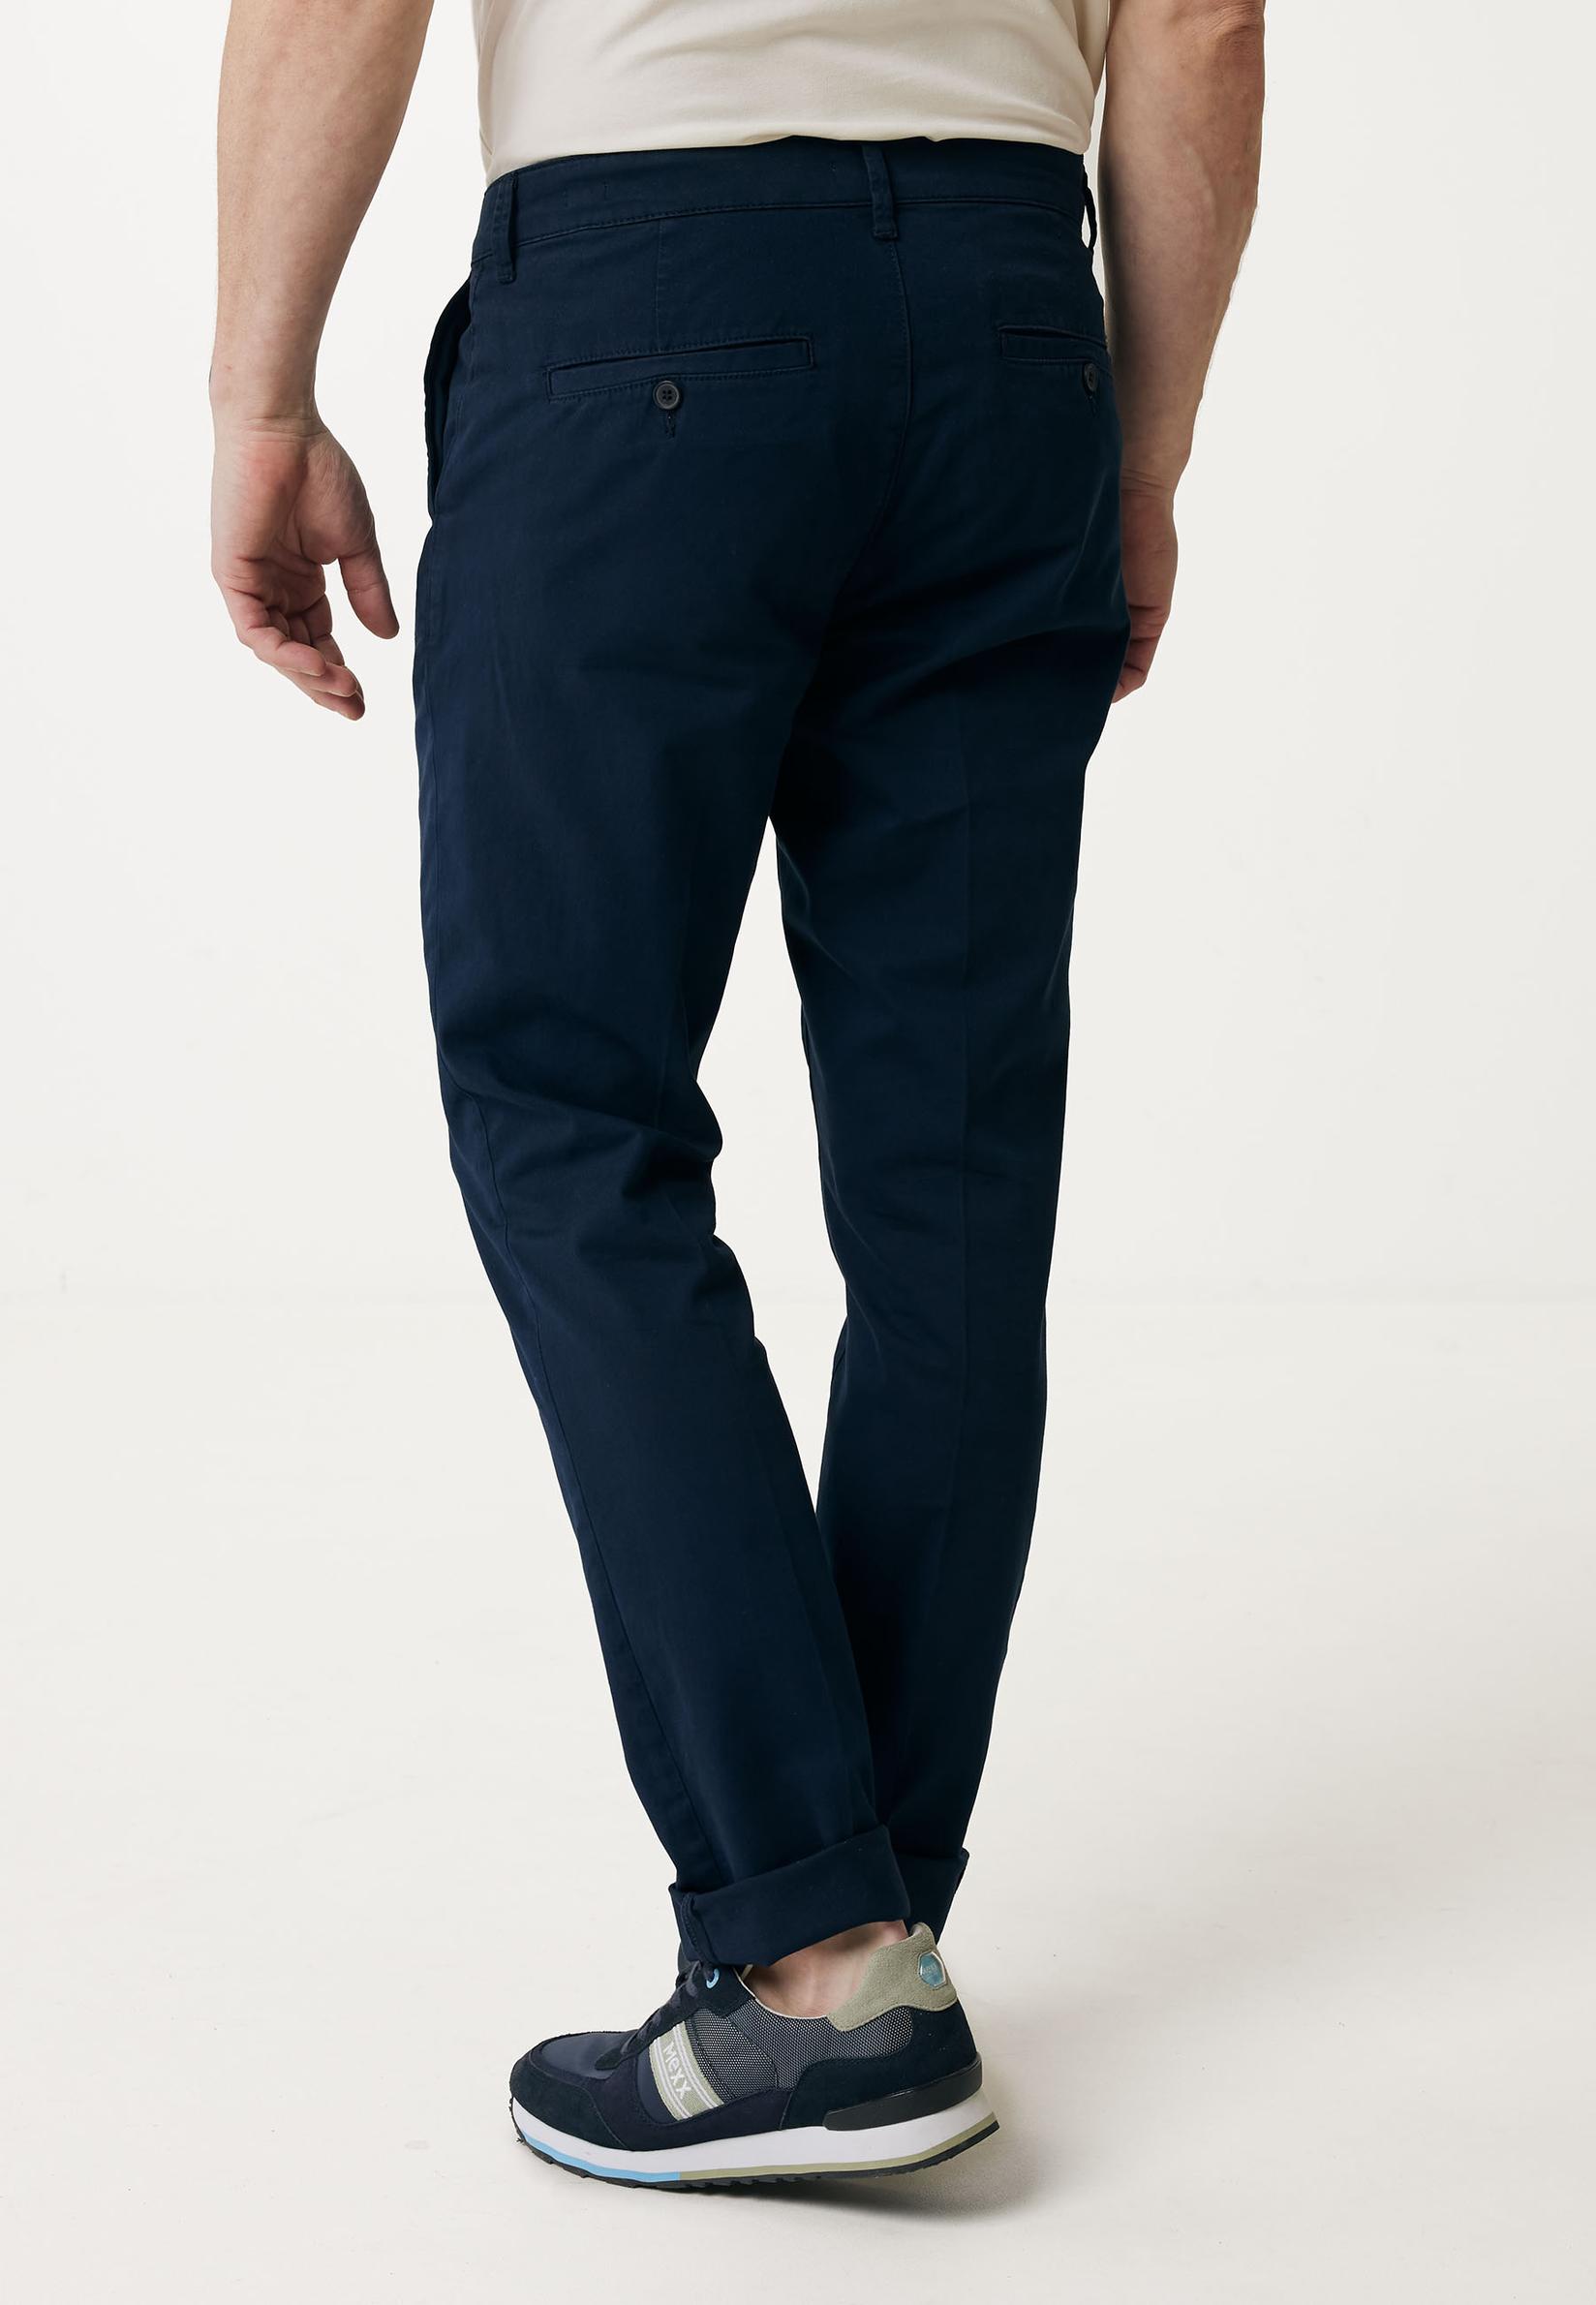 Selected image for MEXX Muške pantalone Gregory, Teget